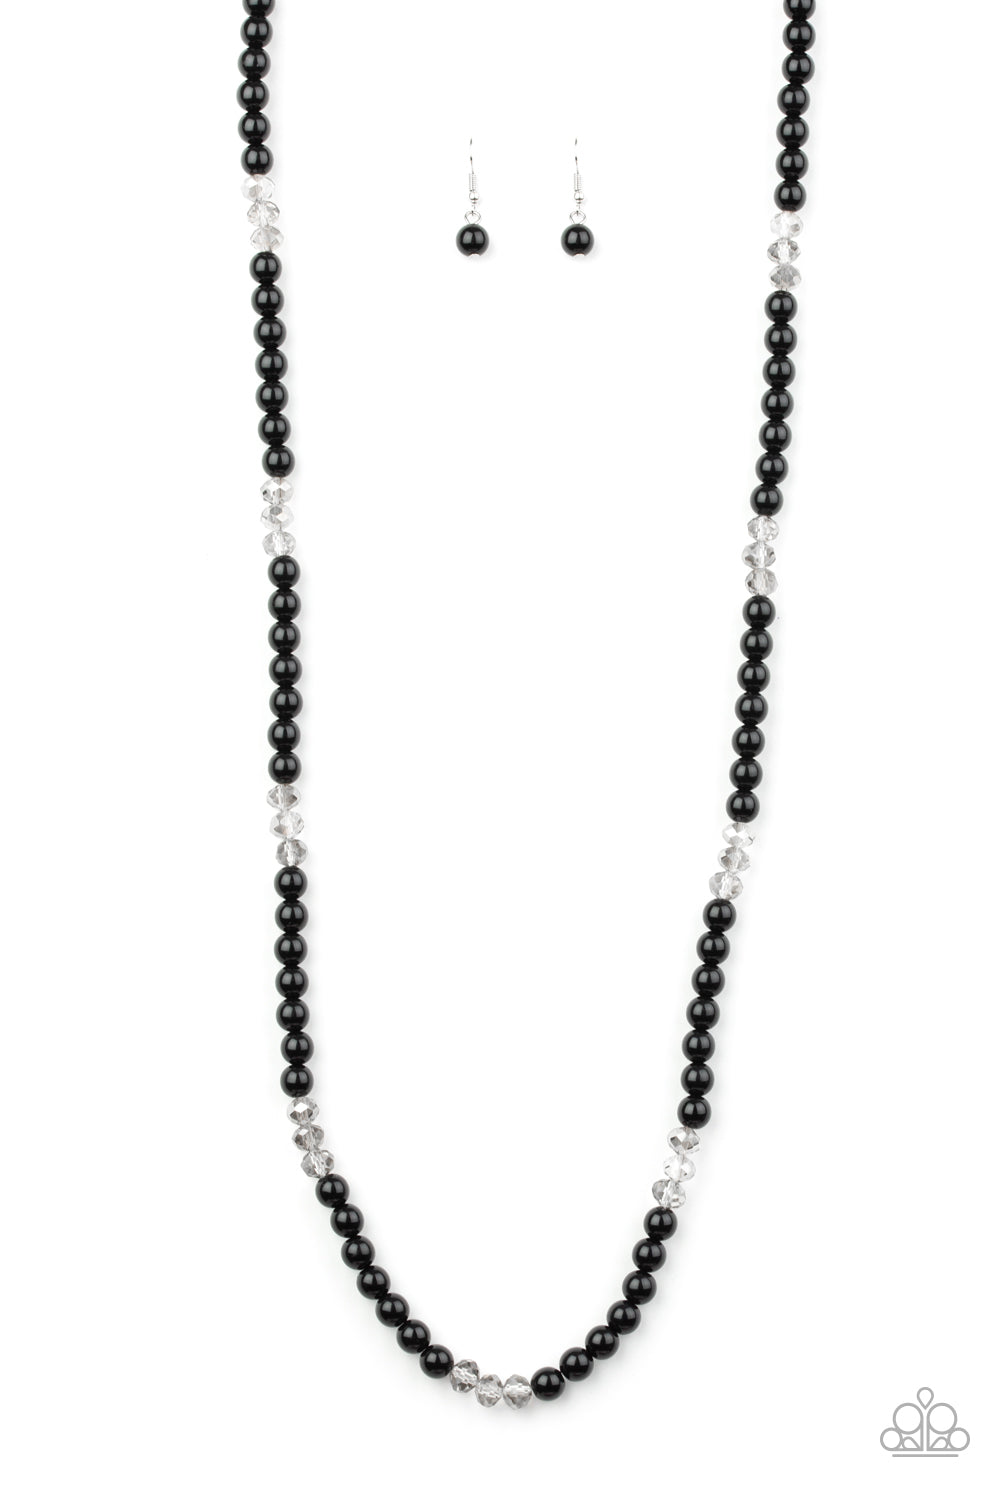 Girls Have More FUNDS Black Necklace - Paparazzi Accessories